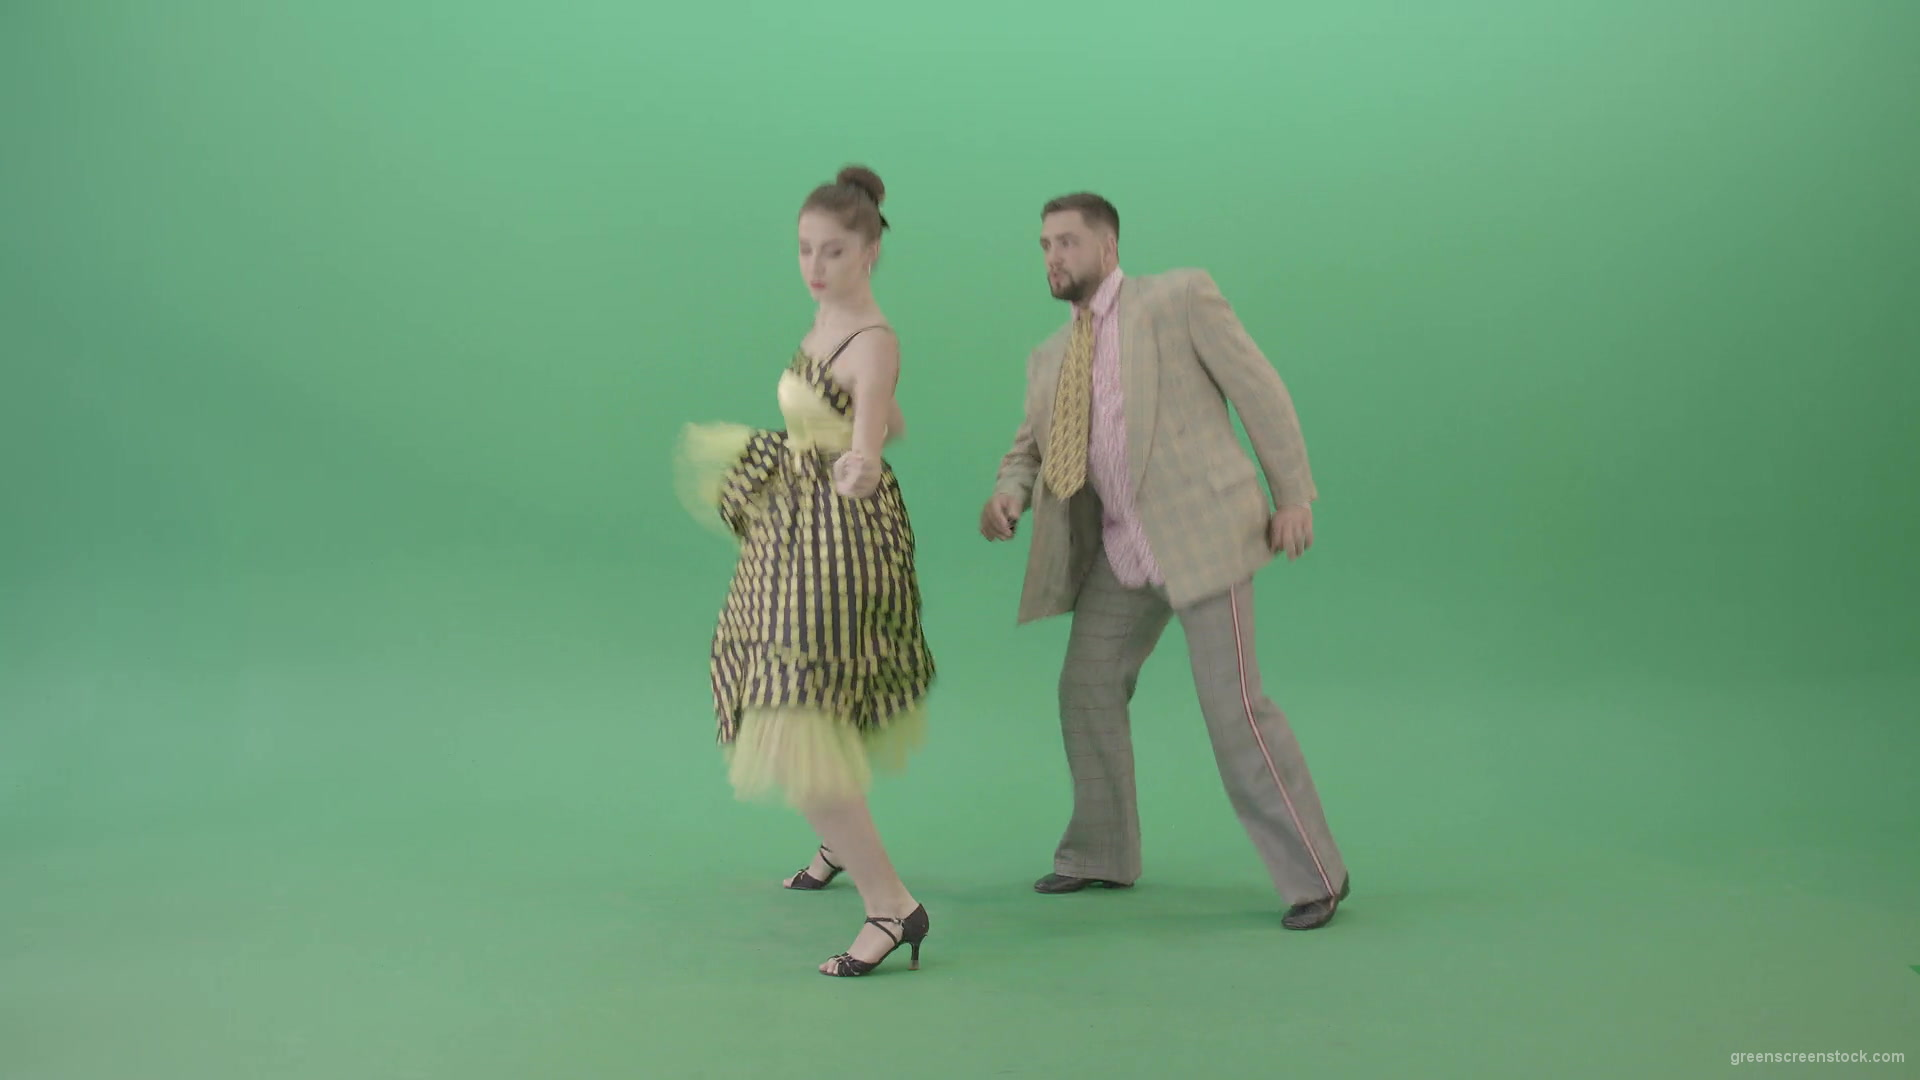 Beautiful-man-and-woman-dancing-Lindy-Hop-Jazz-and-Swing-dance-isolated-on-Green-Screen-4K-Video-Footage-1920_002 Green Screen Stock